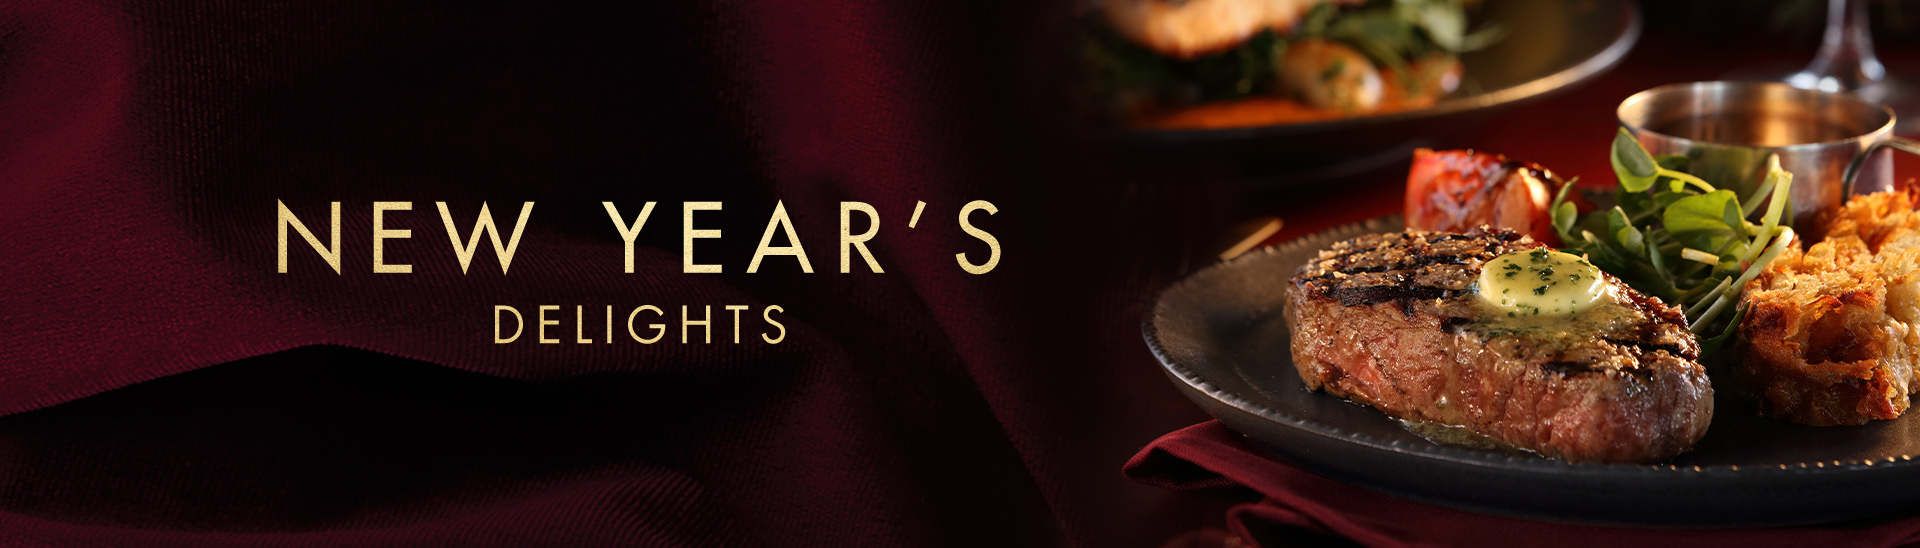 New Year’s Eve 2019 at Miller & Carter Newton Mearns